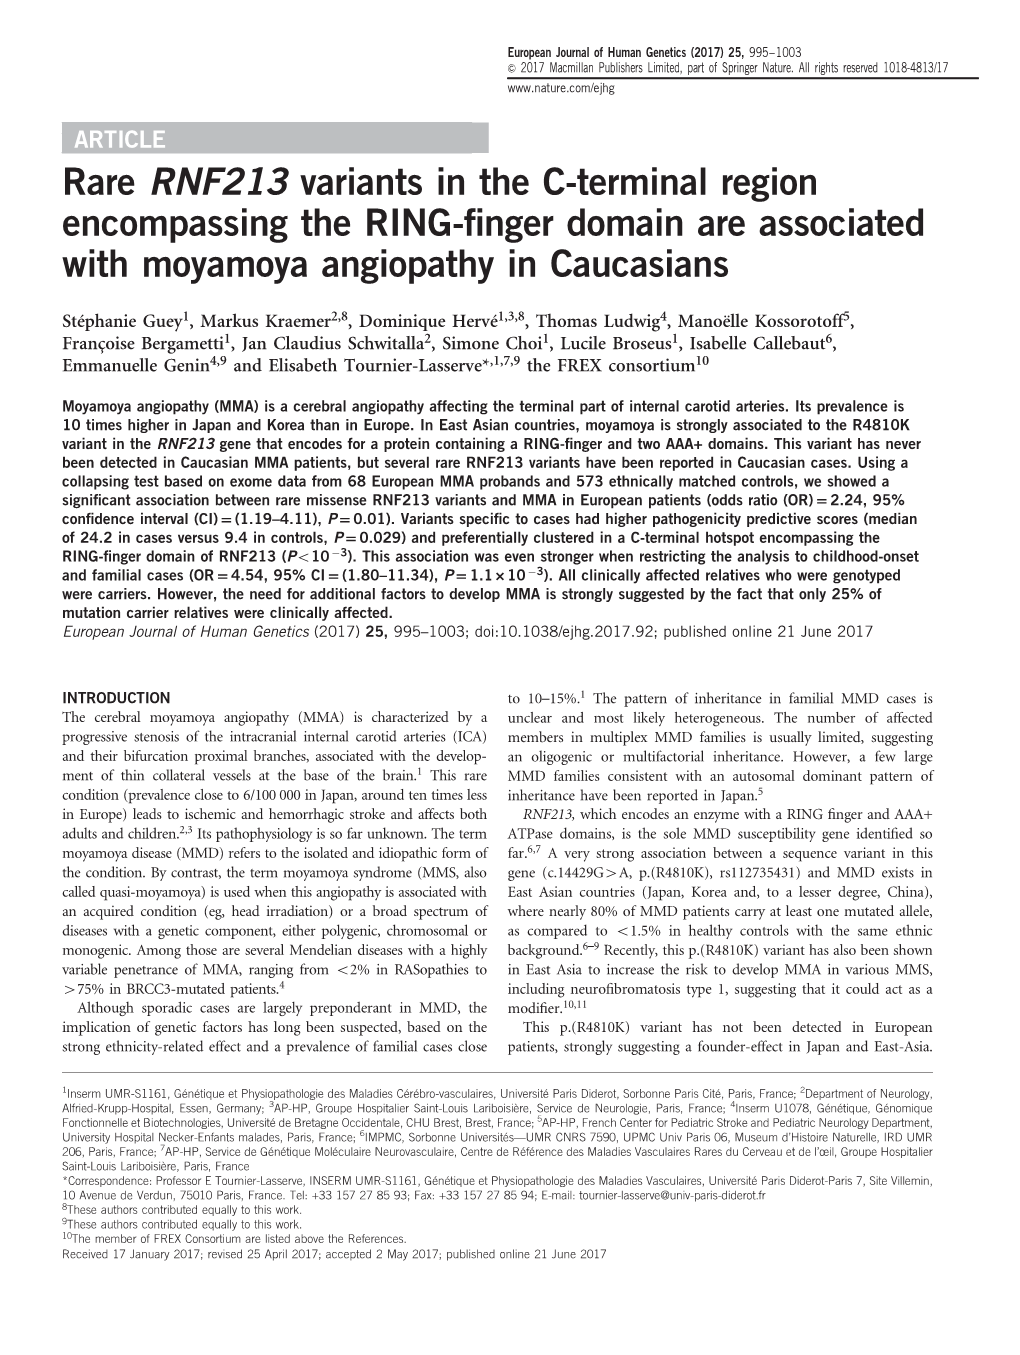 Rare RNF213 Variants in the C-Terminal Region Encompassing the RING-Finger Domain Are Associated with Moyamoya Angiopathy In